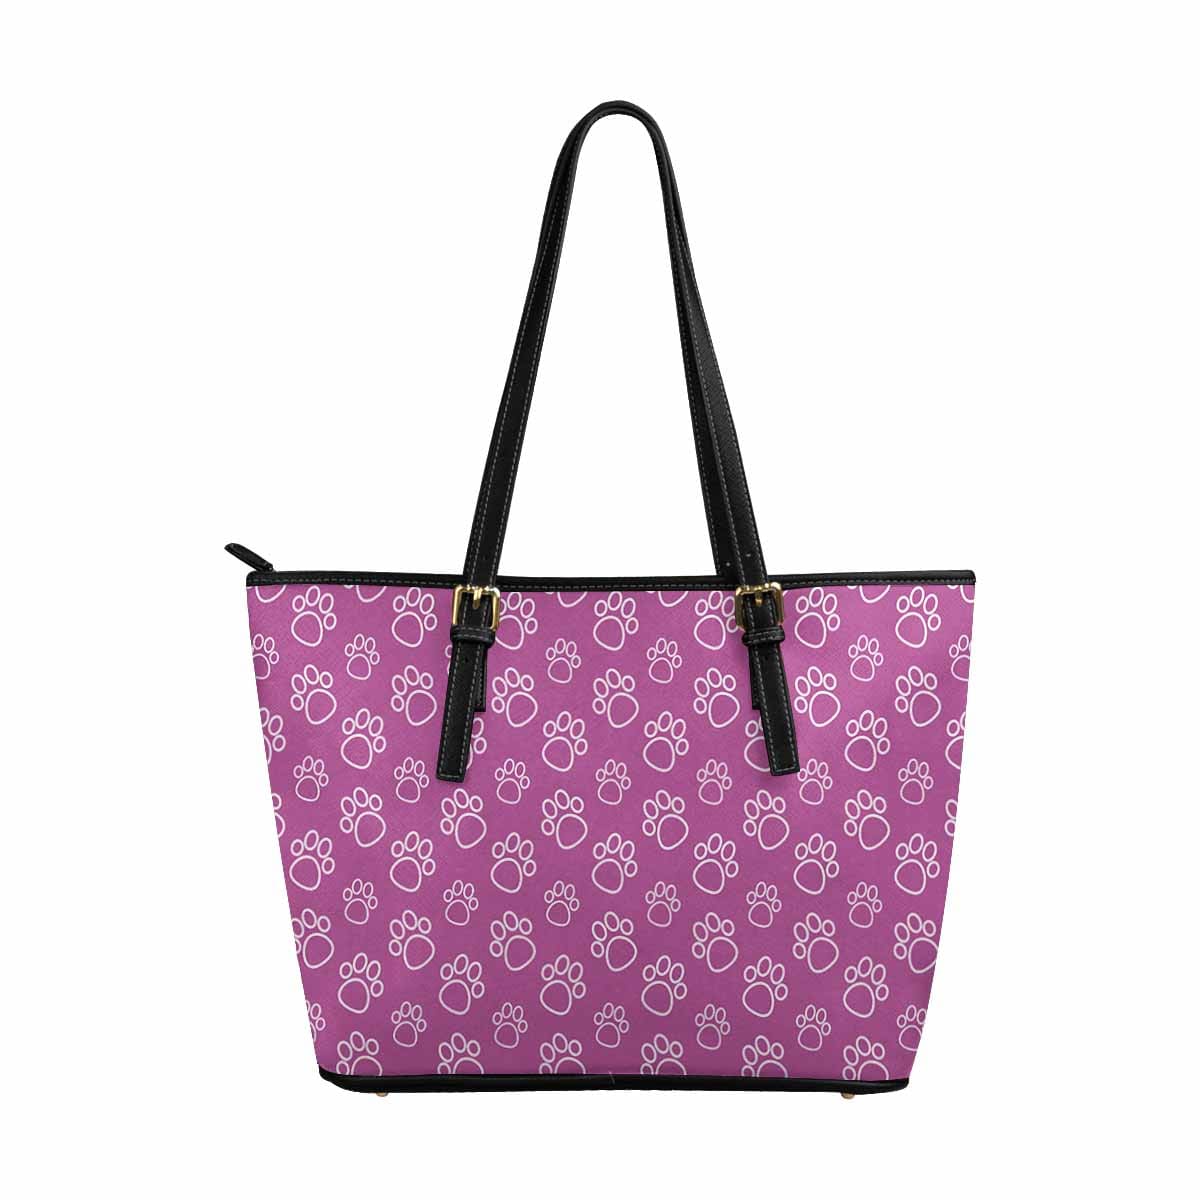 Large Leather Tote Shoulder Bag - Paws Fuschia Tote - Bags | Leather Tote Bags